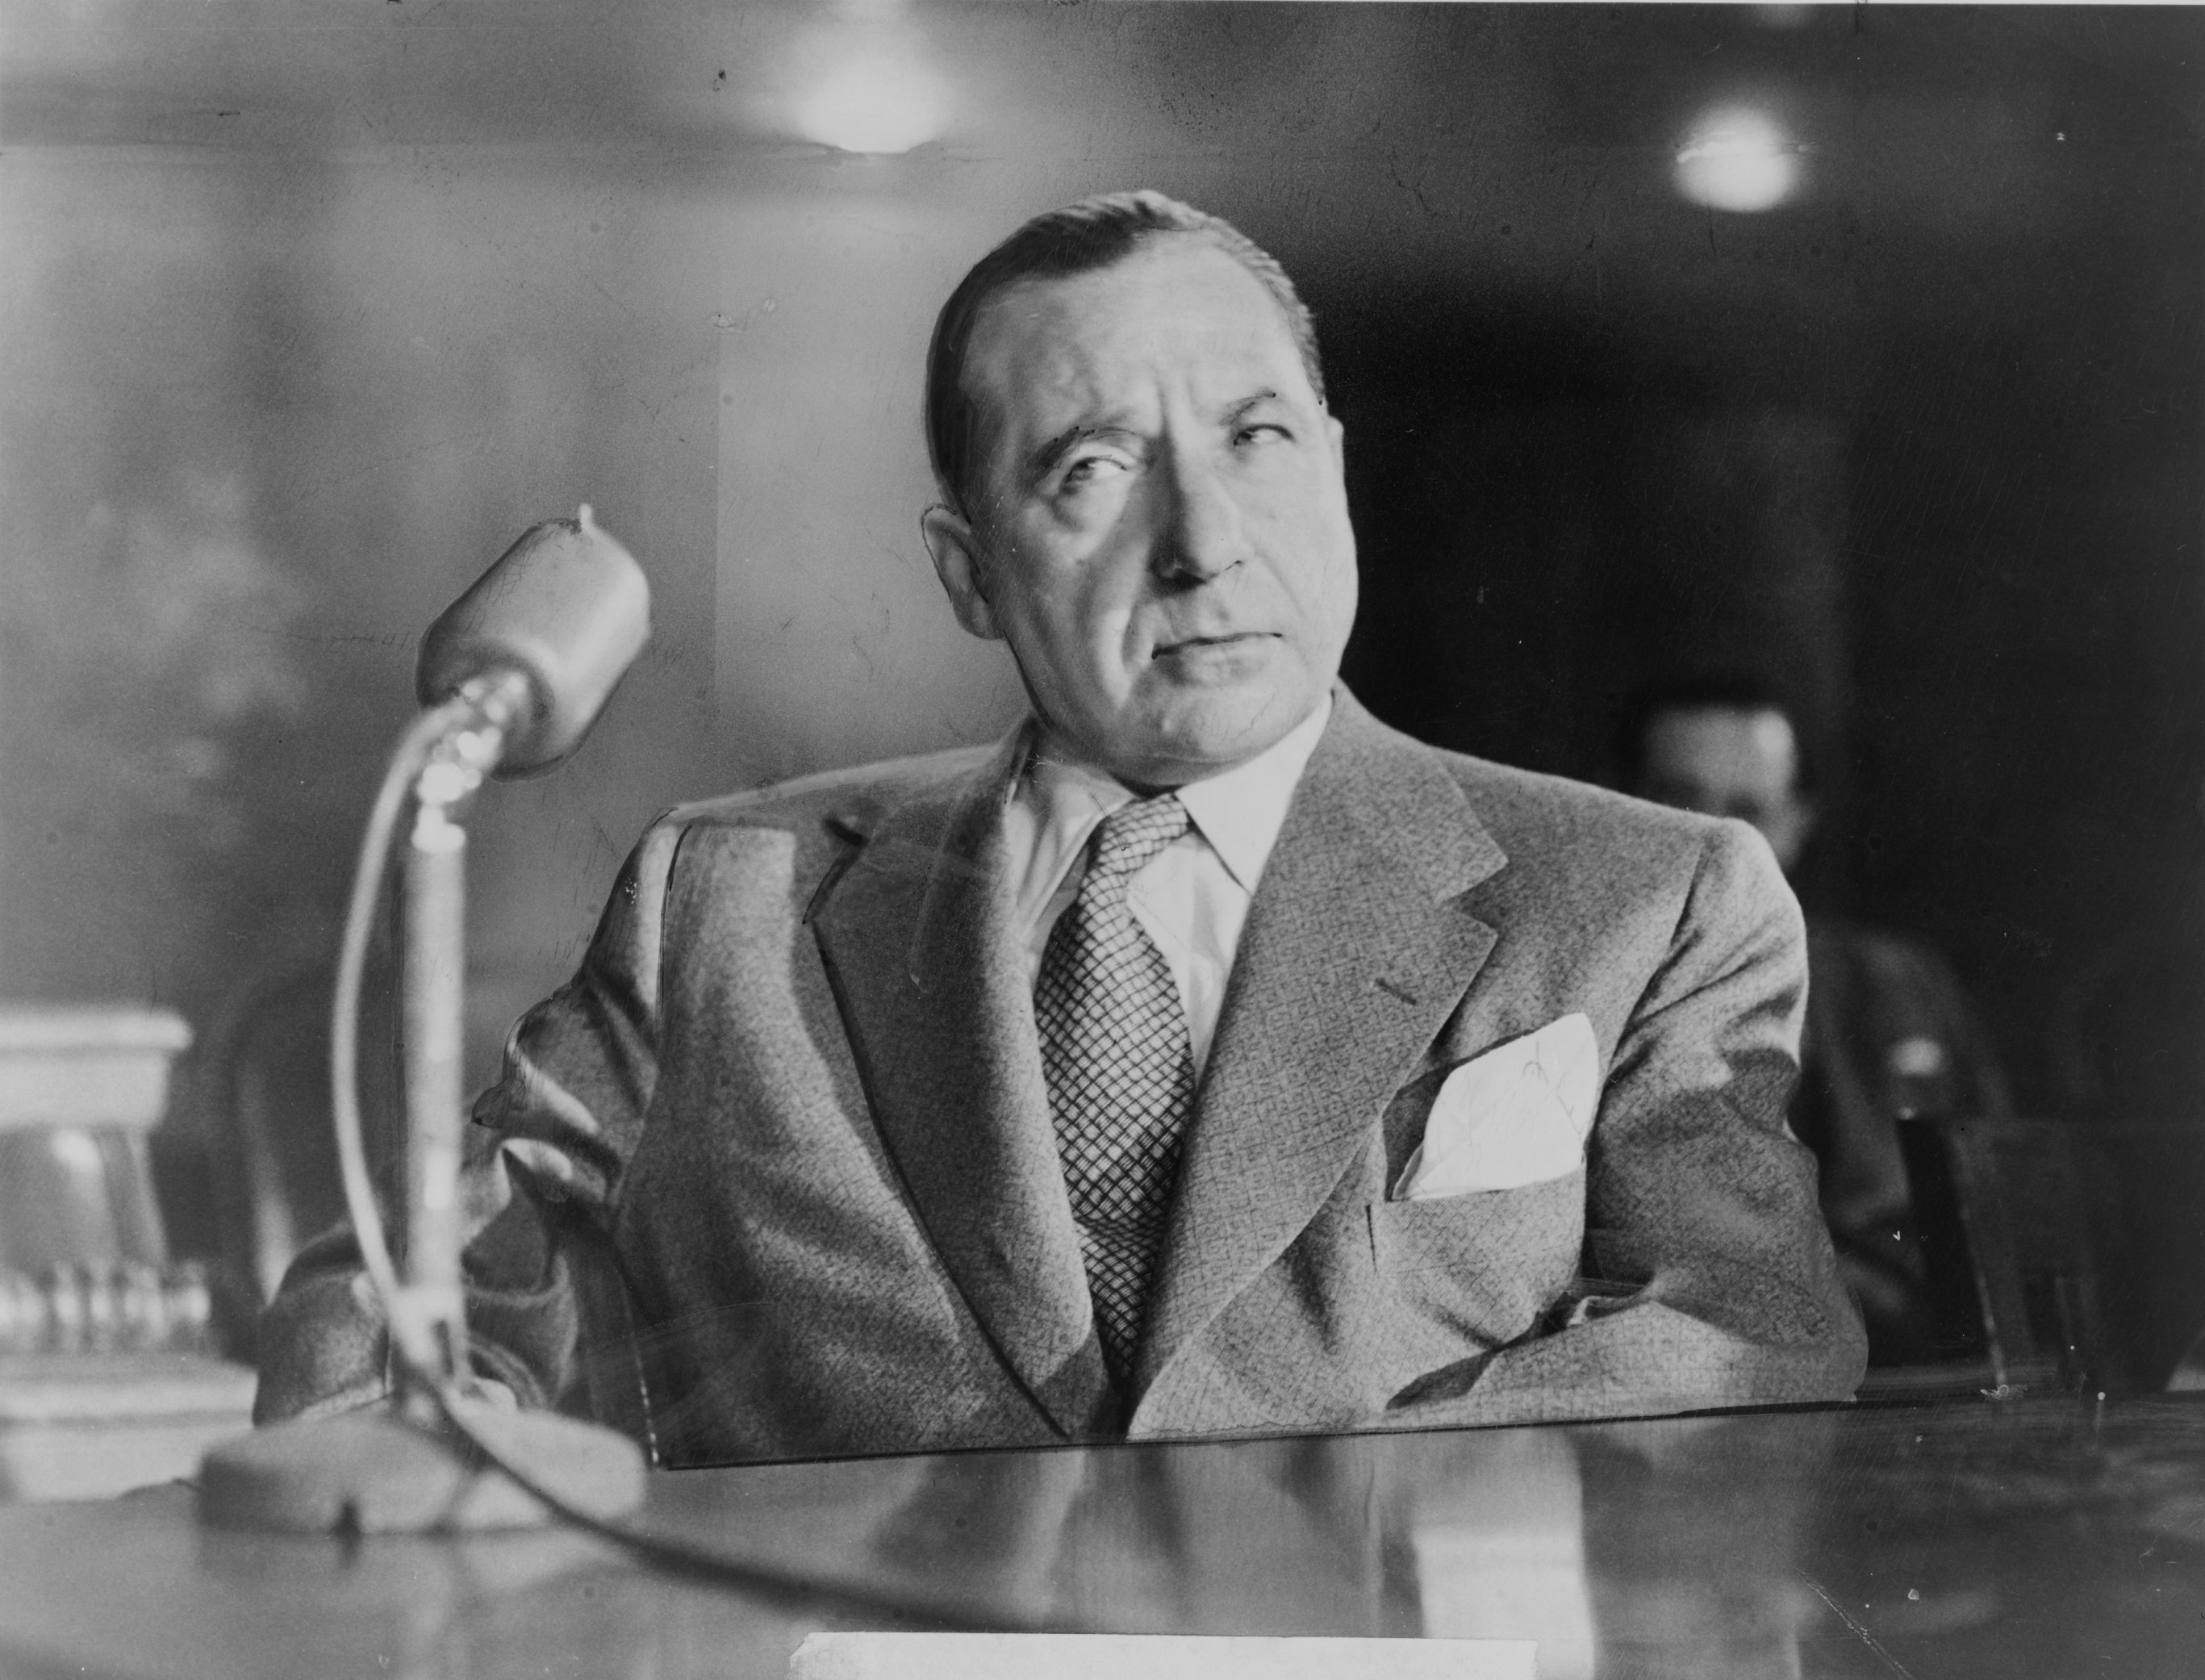 http://upload.wikimedia.org/wikipedia/commons/5/5b/Frank_Costello_-_Kefauver_Committee.jpg